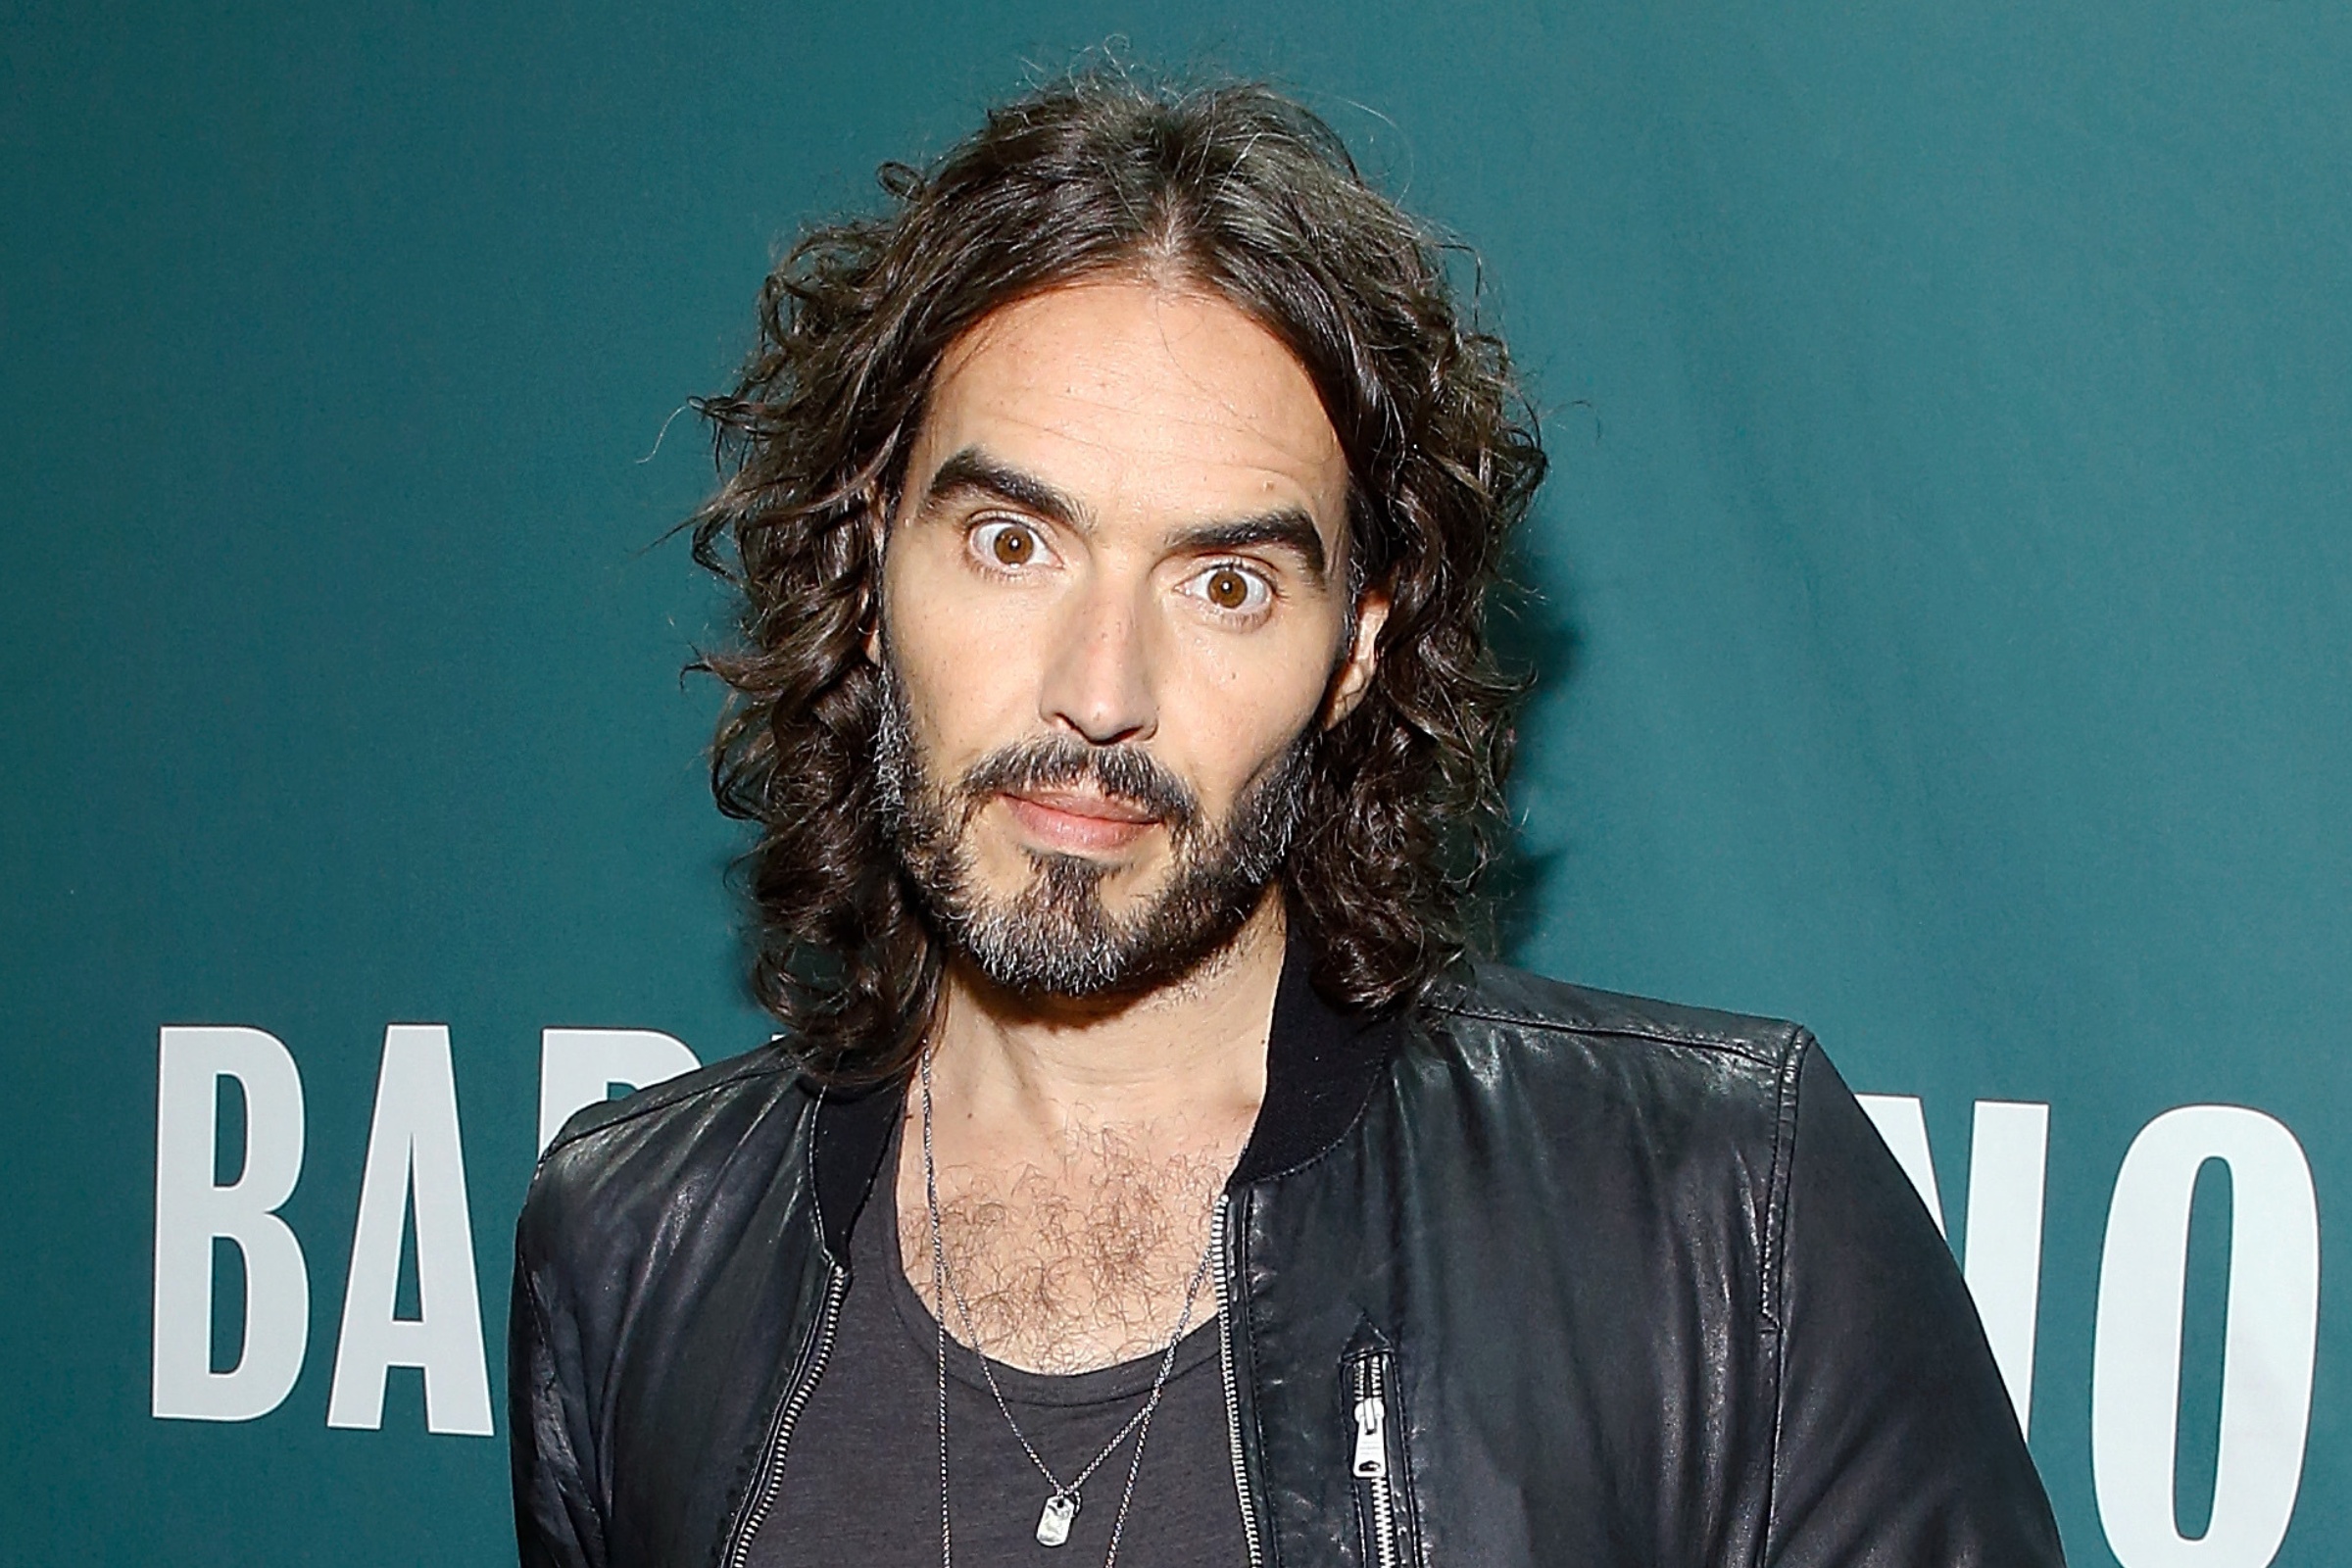 Rumble Faces Its Biggest Test in Russell Brand Fight - Newsweek